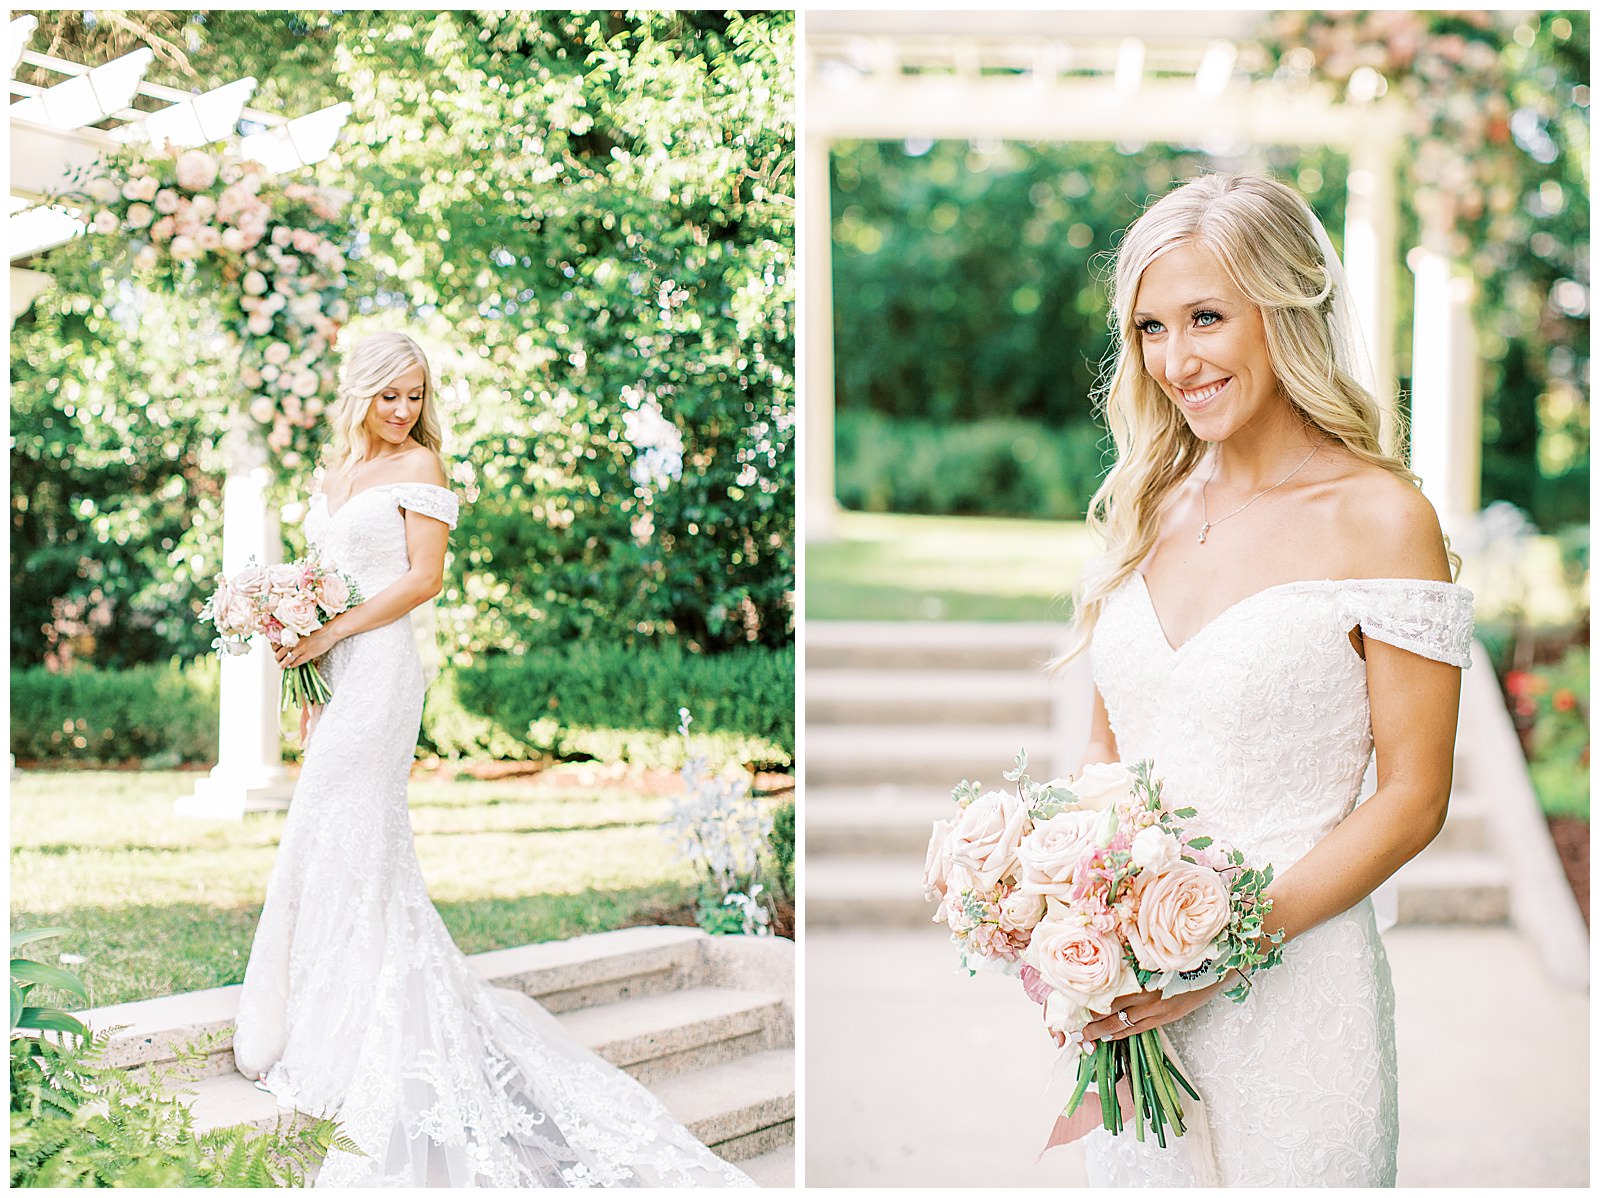 lace dress blond haired bride portraits outdoors under arch at separk mansion summer wedding